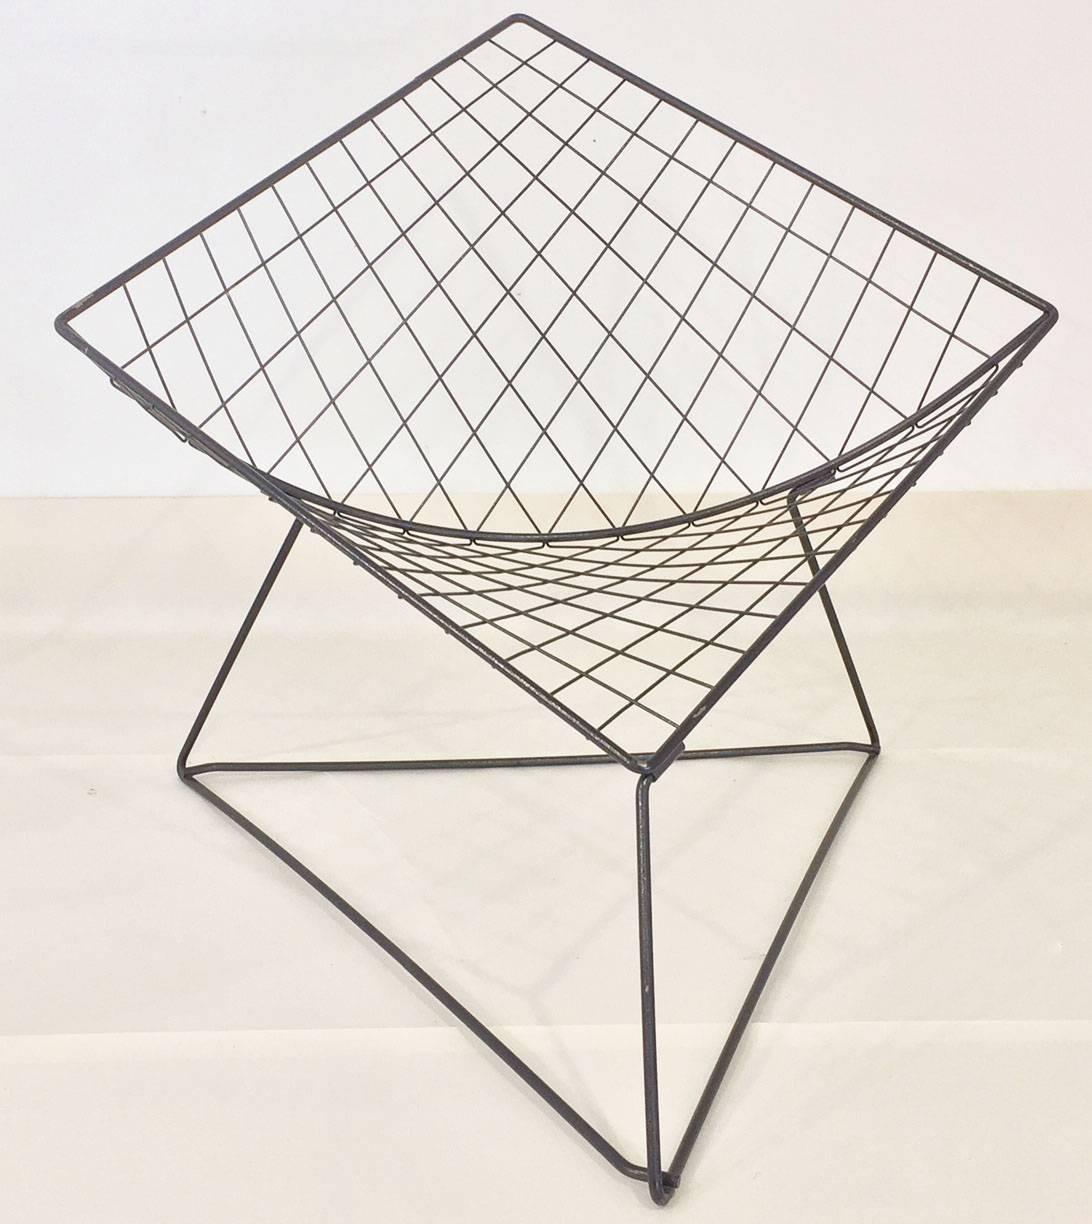 This lounge chair, Oti model, created in 1986 by Niels Gammelgaard for Ikea, is today among the classics of Danish design of the 1980s. The structure is in anthracite grey lacquered metal and forms a rhombus on a triangular base.
 
Good vintage